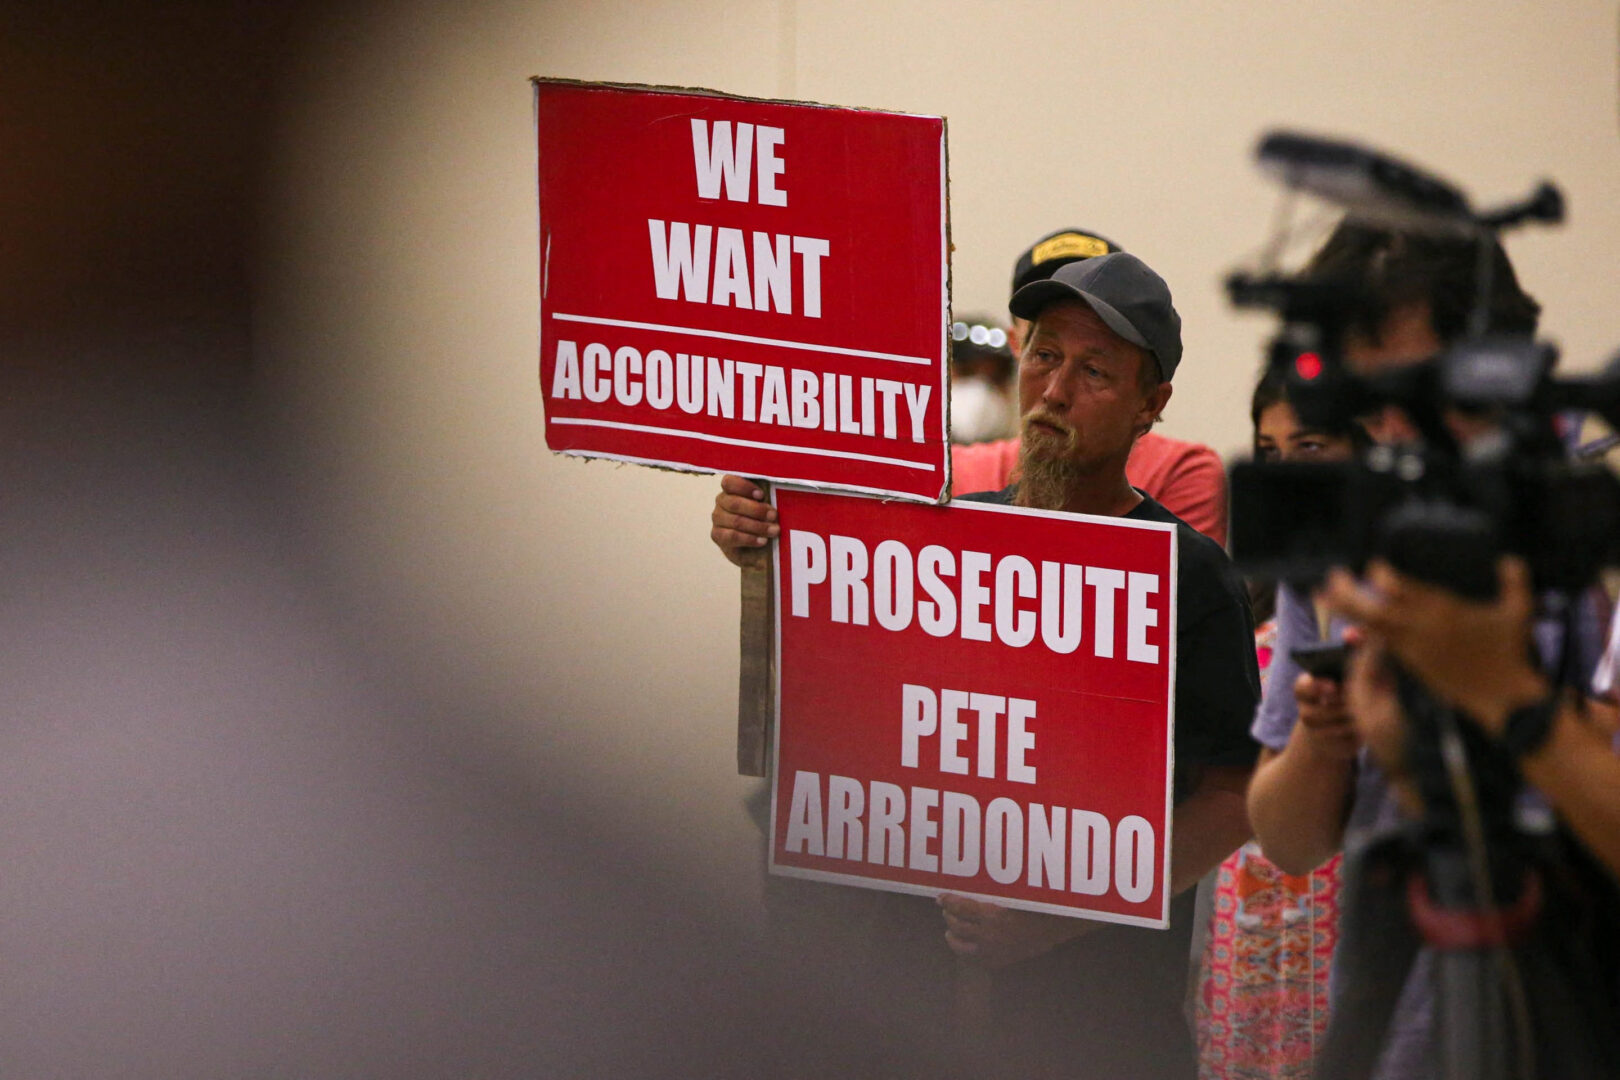 Michael Brown, an Uvalde community member who has a child that was enrolled ar Robb Elementary, holds signs calling for police accountability during a hearing by a Texas House Investigative Committee at the SSGT Willie de Leon Civic Center in Uvlade, Texas, U.S. July 17, 2022.